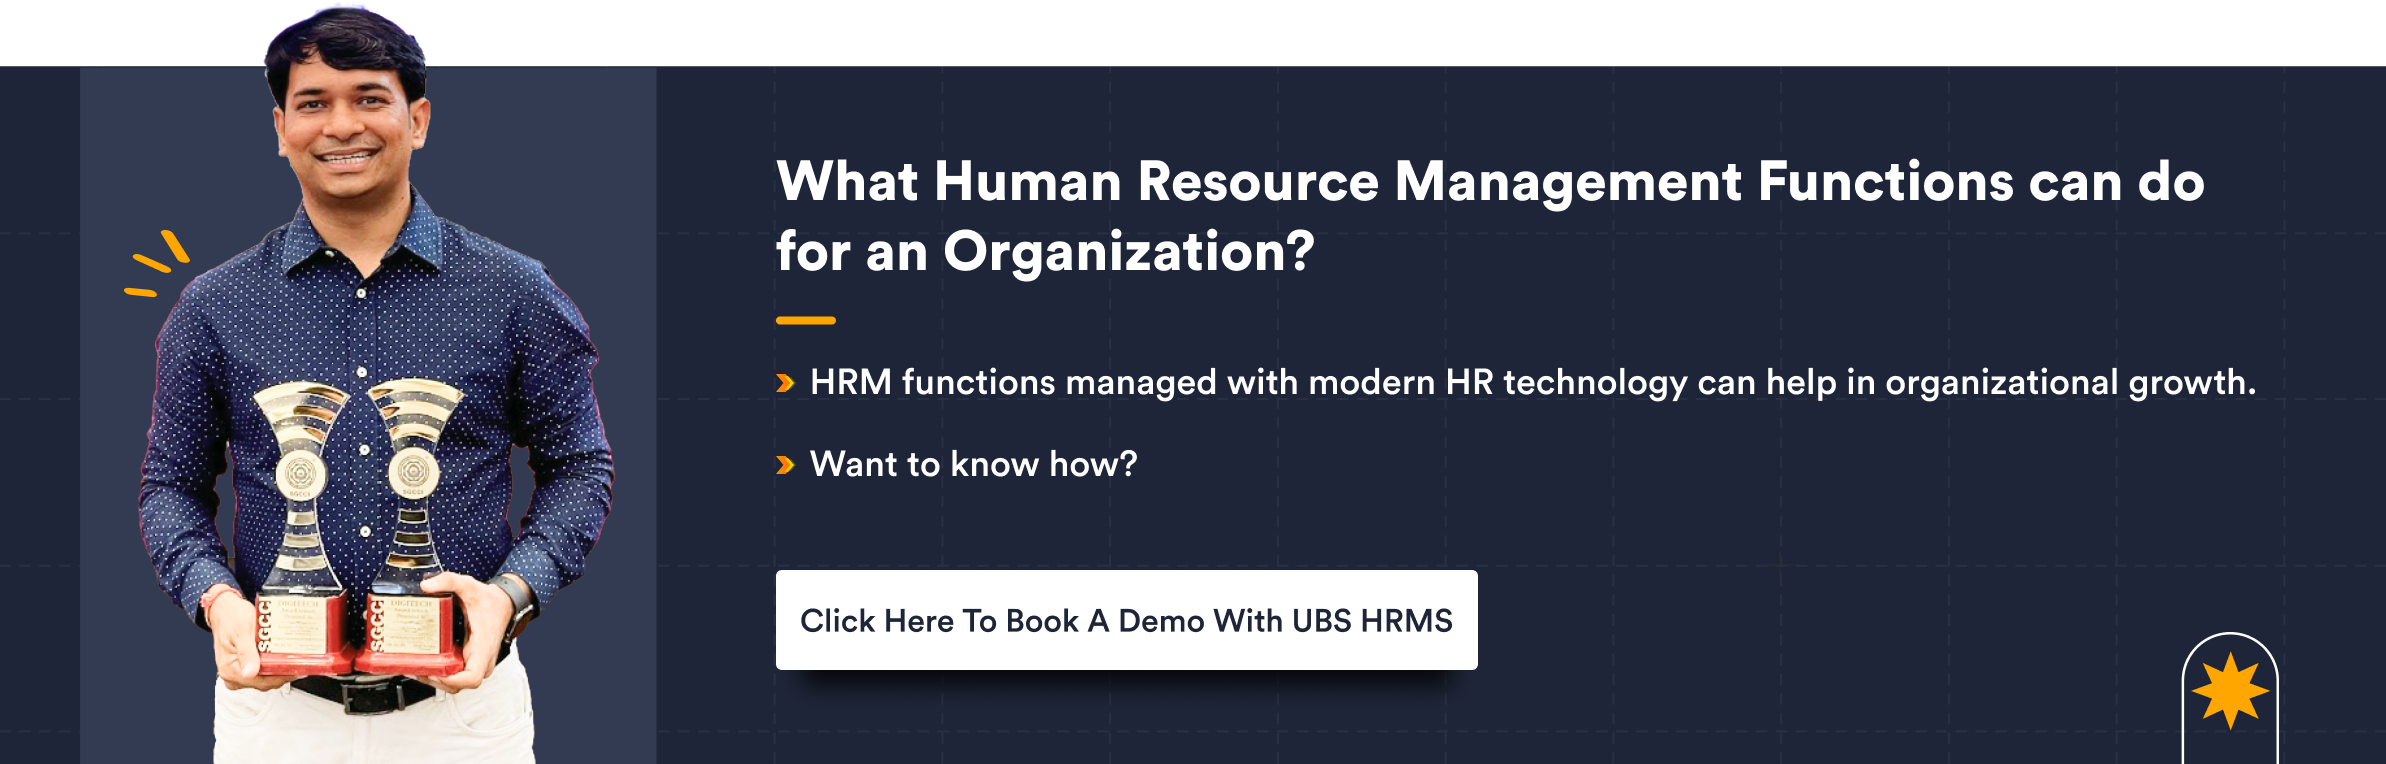 What Human Resource Management Functions can do for an Organization